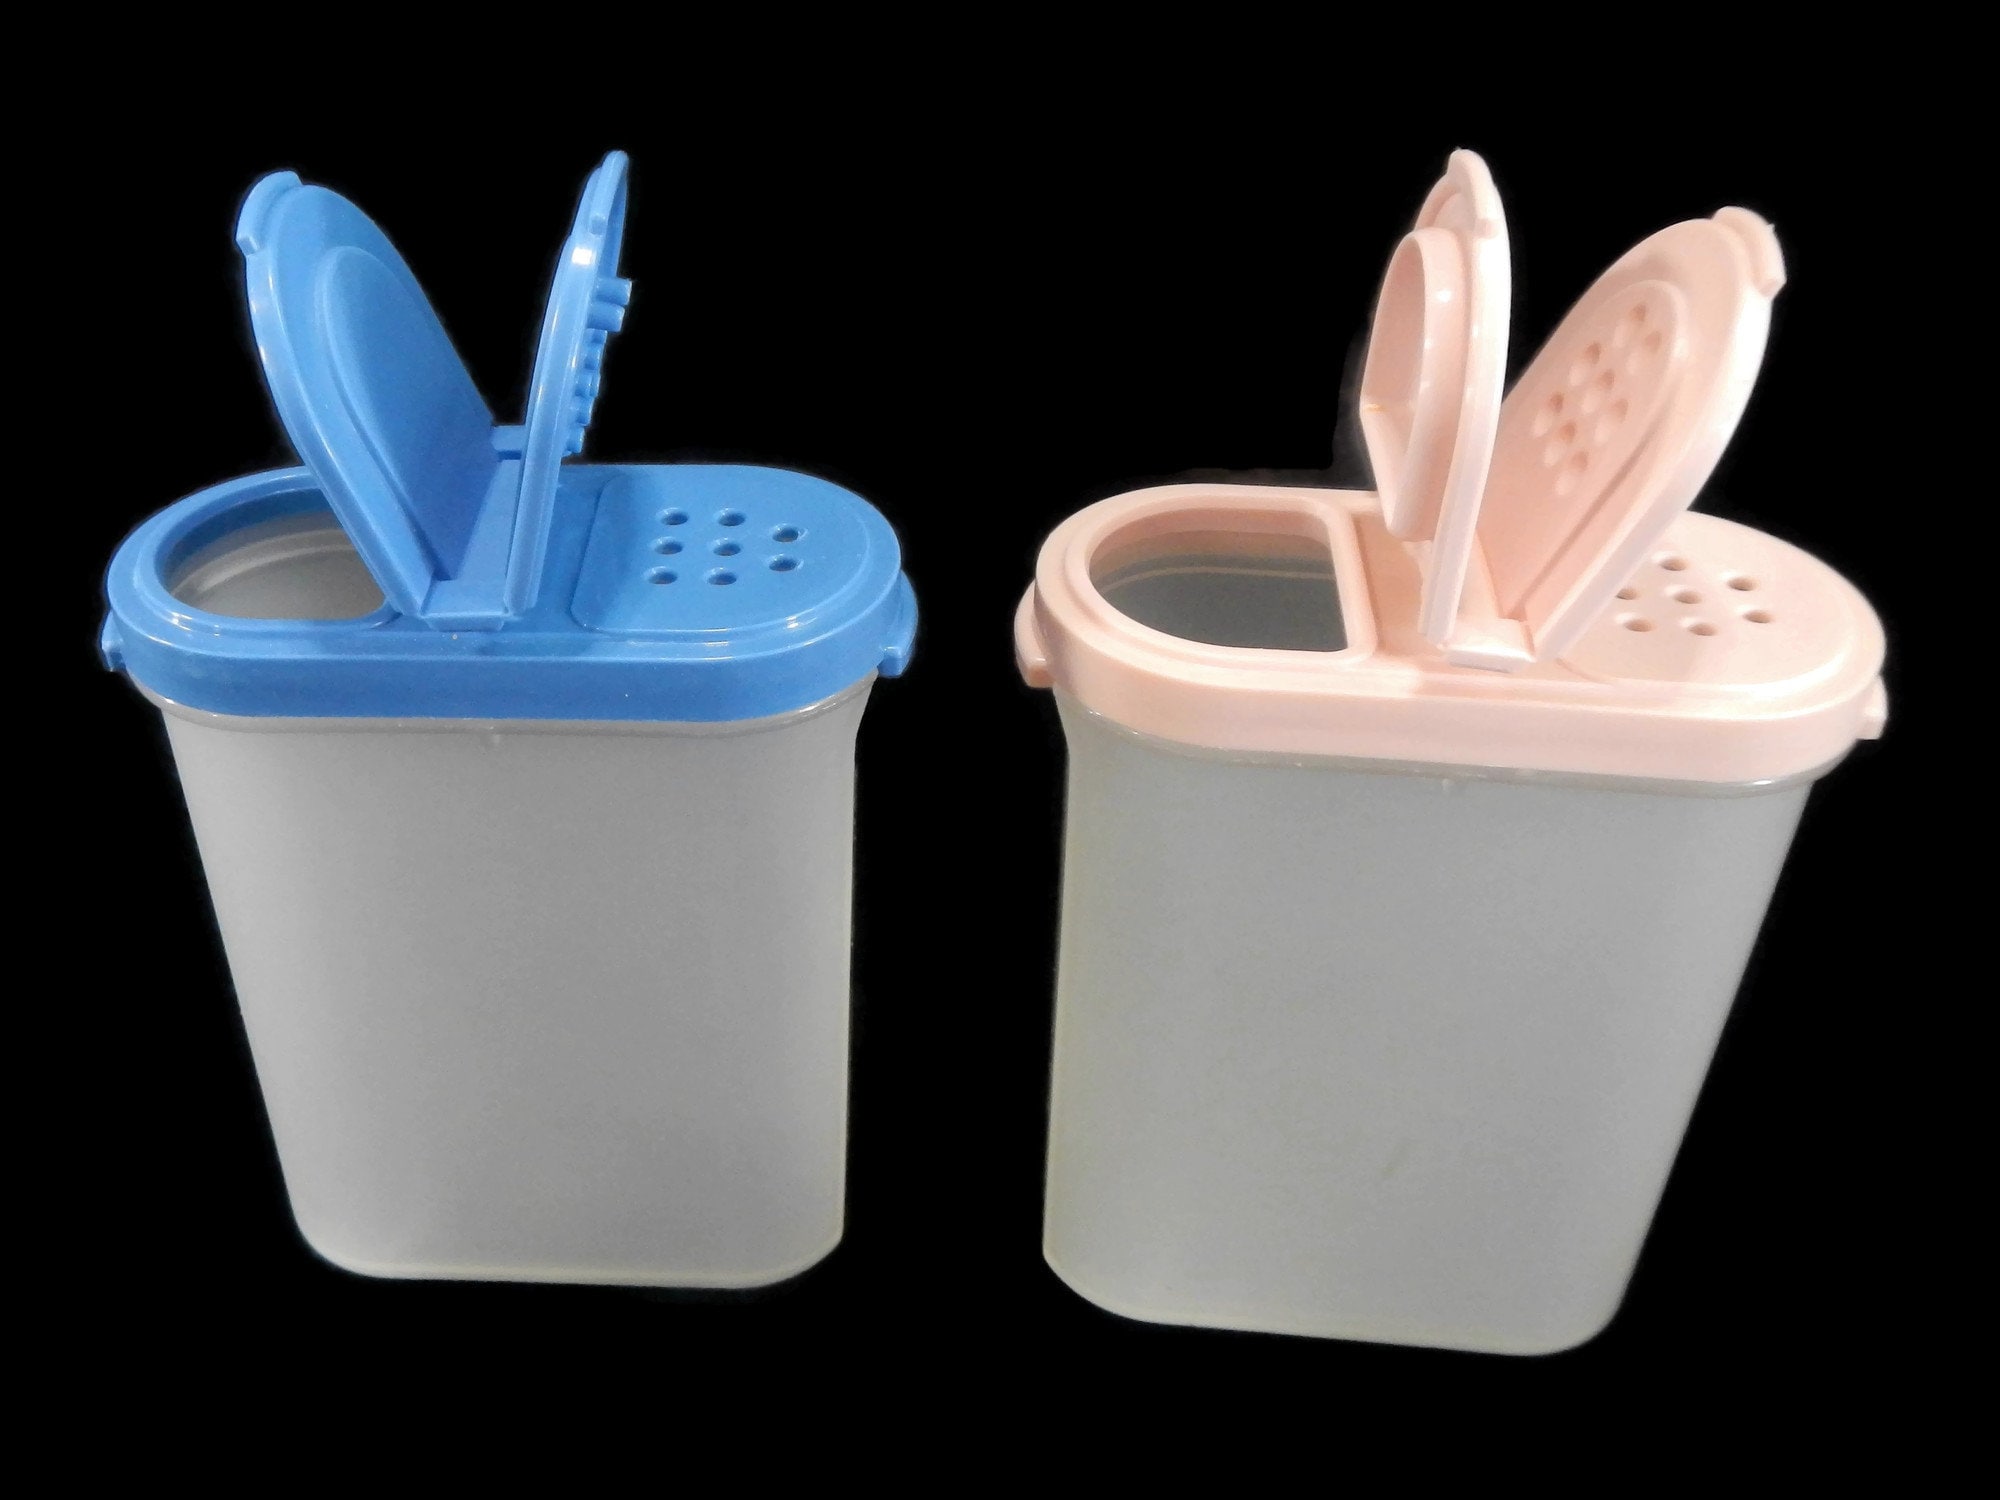 TUPPERWARE SQUARE LID, 12 x 12 Inch, Sheer, Replacement Parts $14.99 -  PicClick